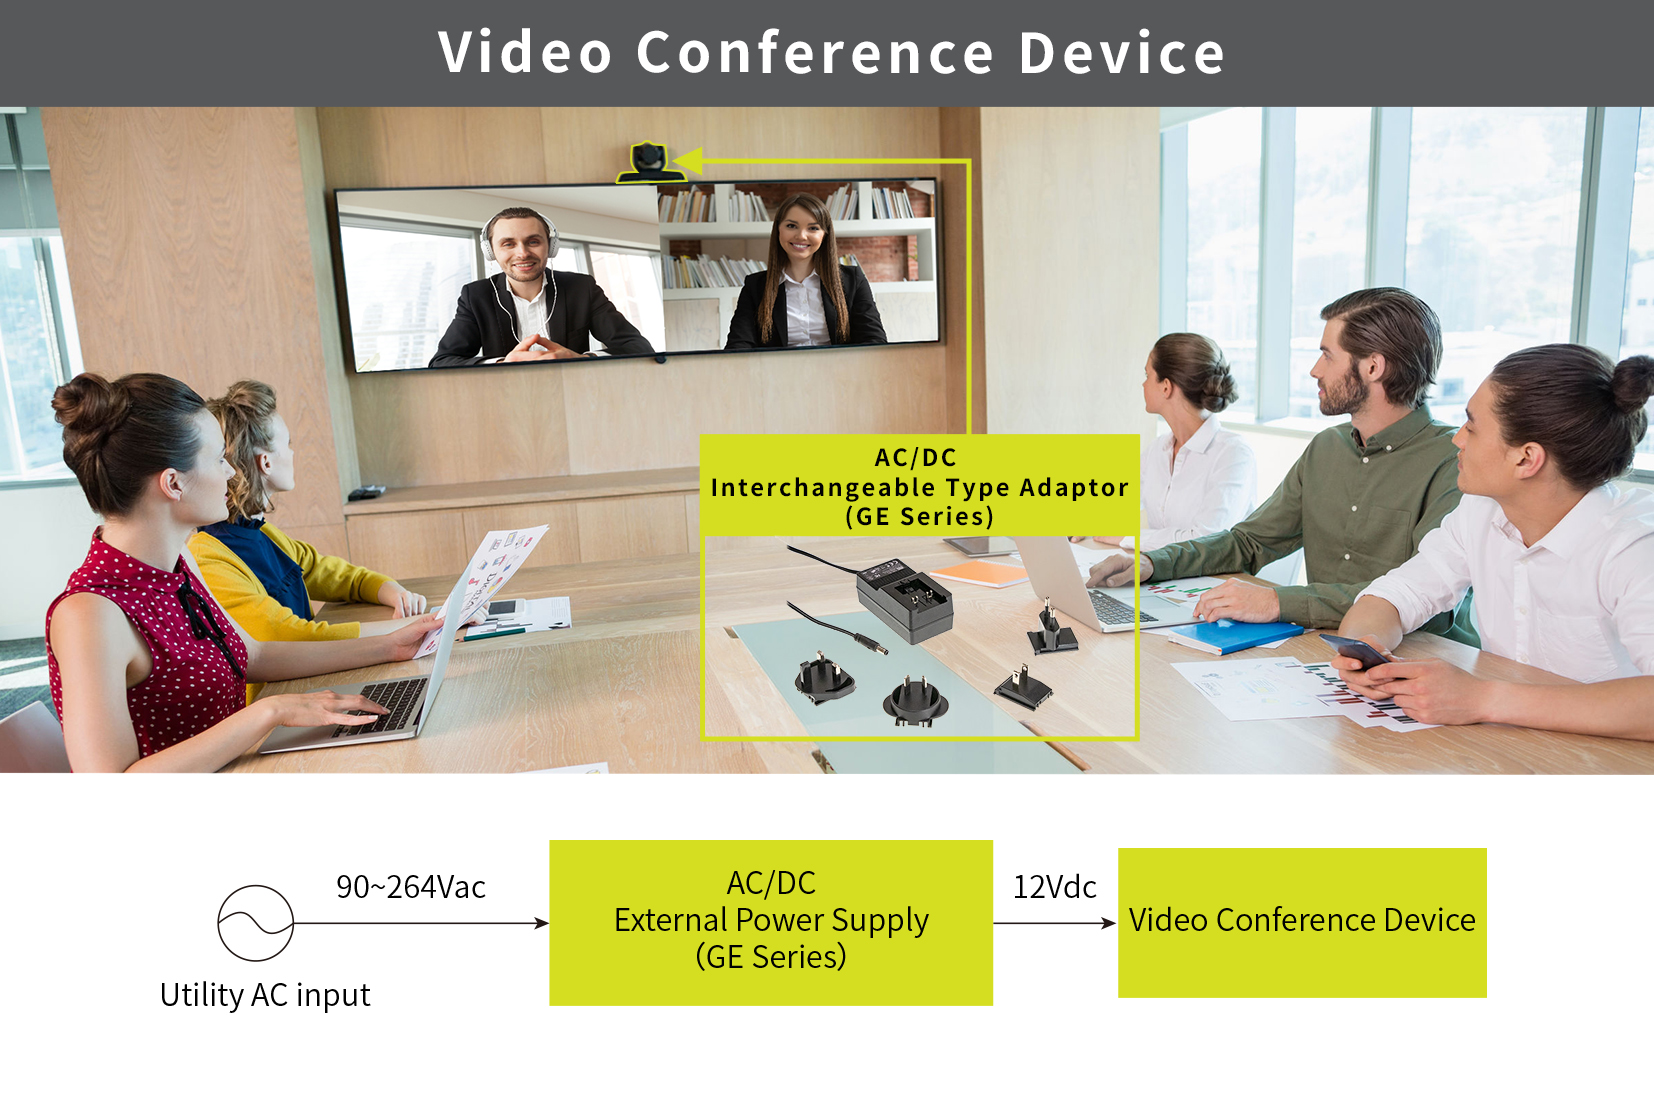 MEAN WELL GE series, interchangeable type adaptor, video conference device